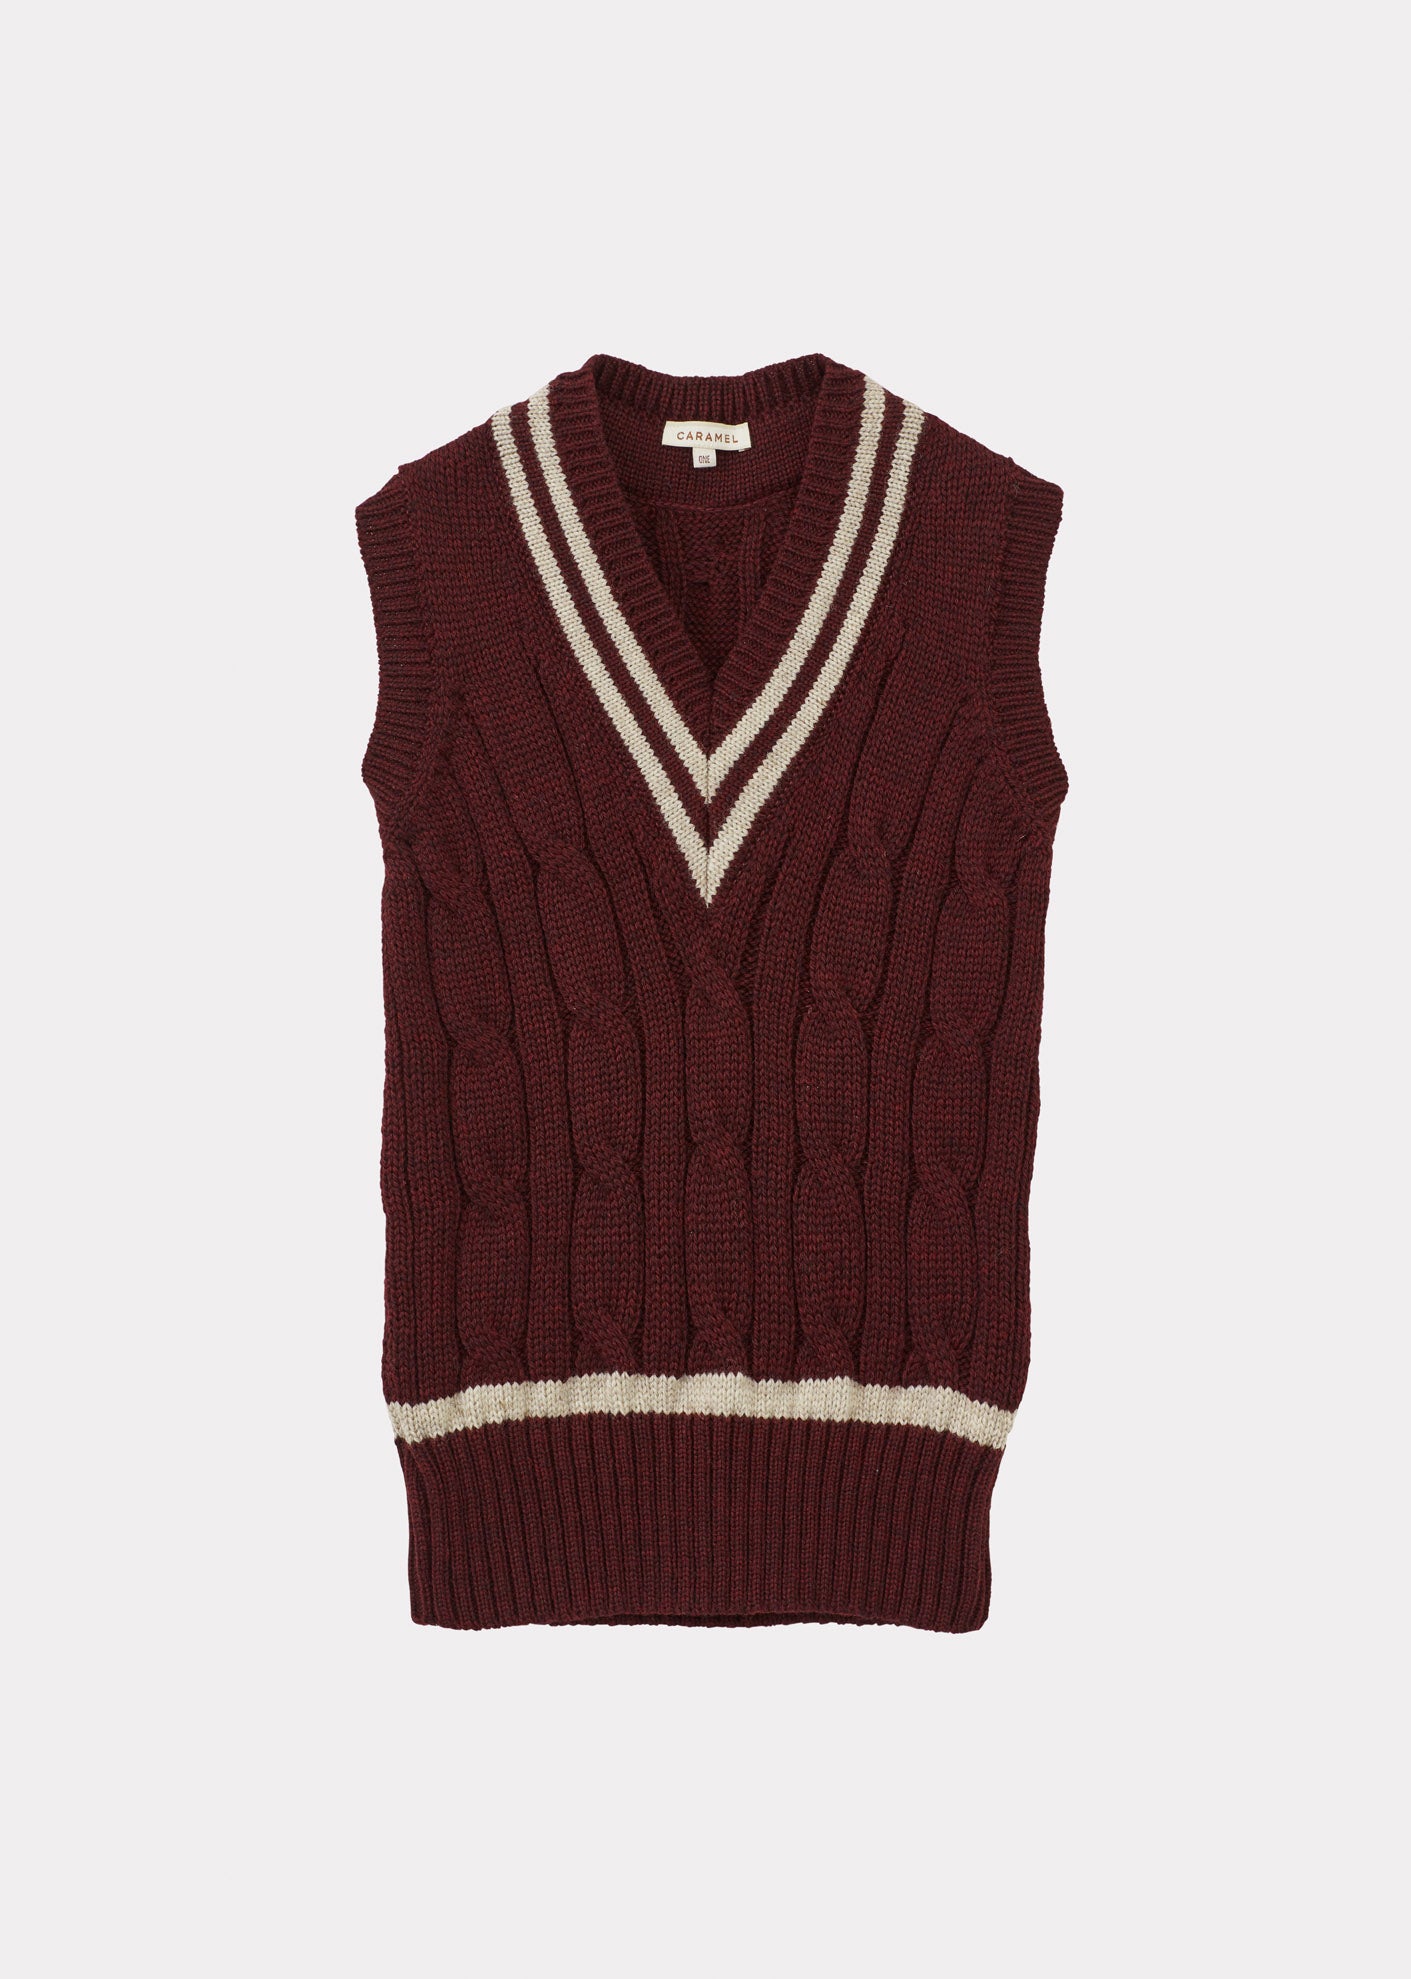 CARDIFF KNIT VEST WOMAN - BROWN 1